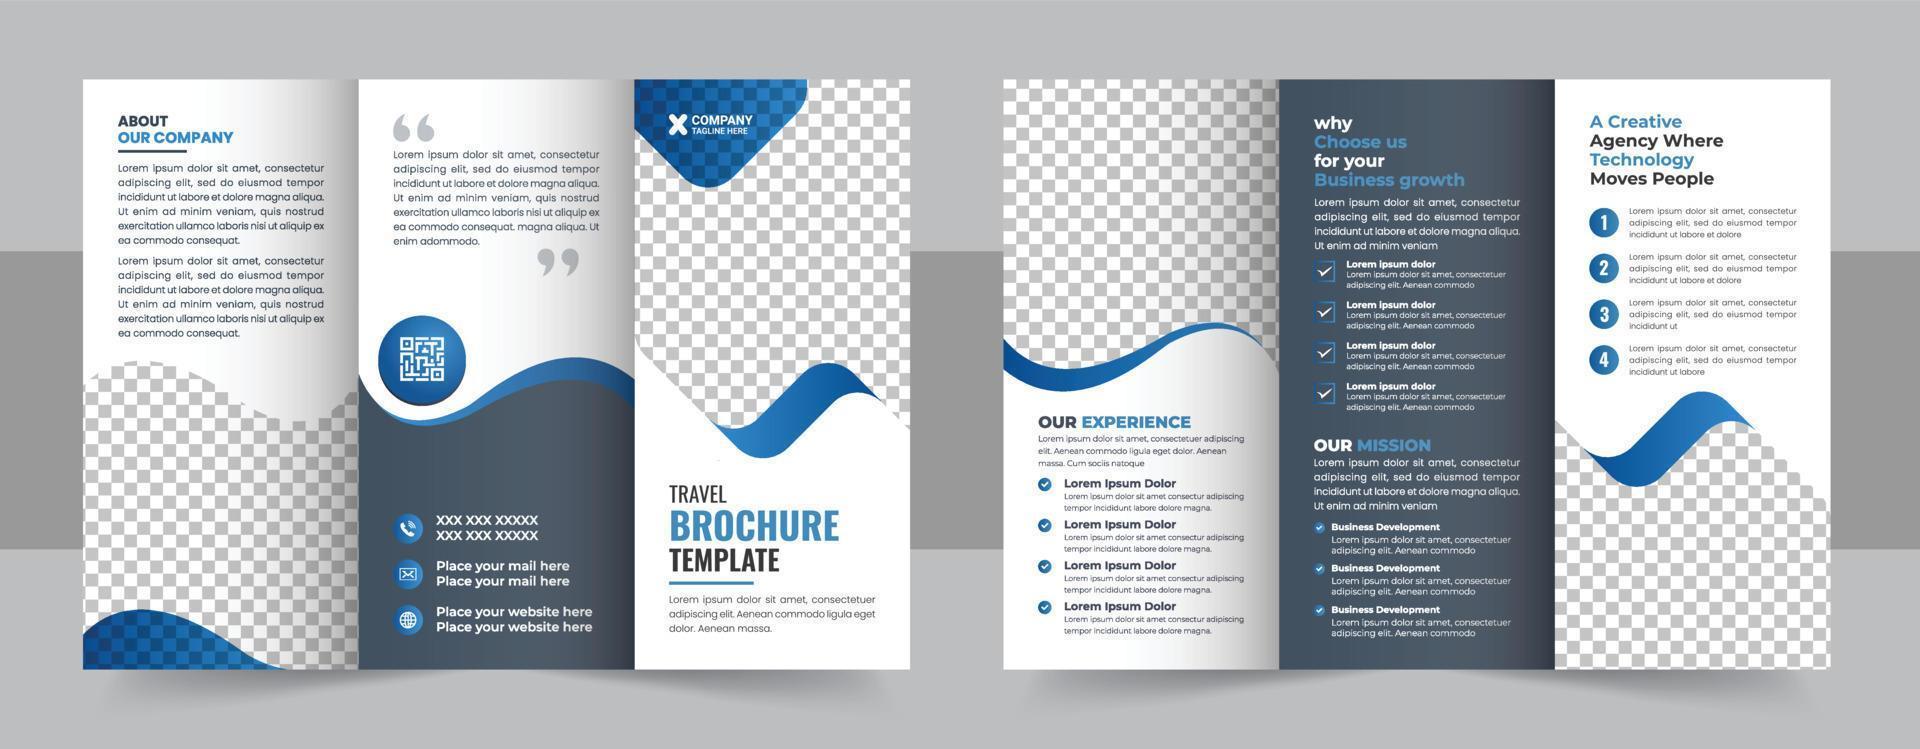 Trifold Travel Brochure Template, Travel tour agency trifold Brochure Design template vector